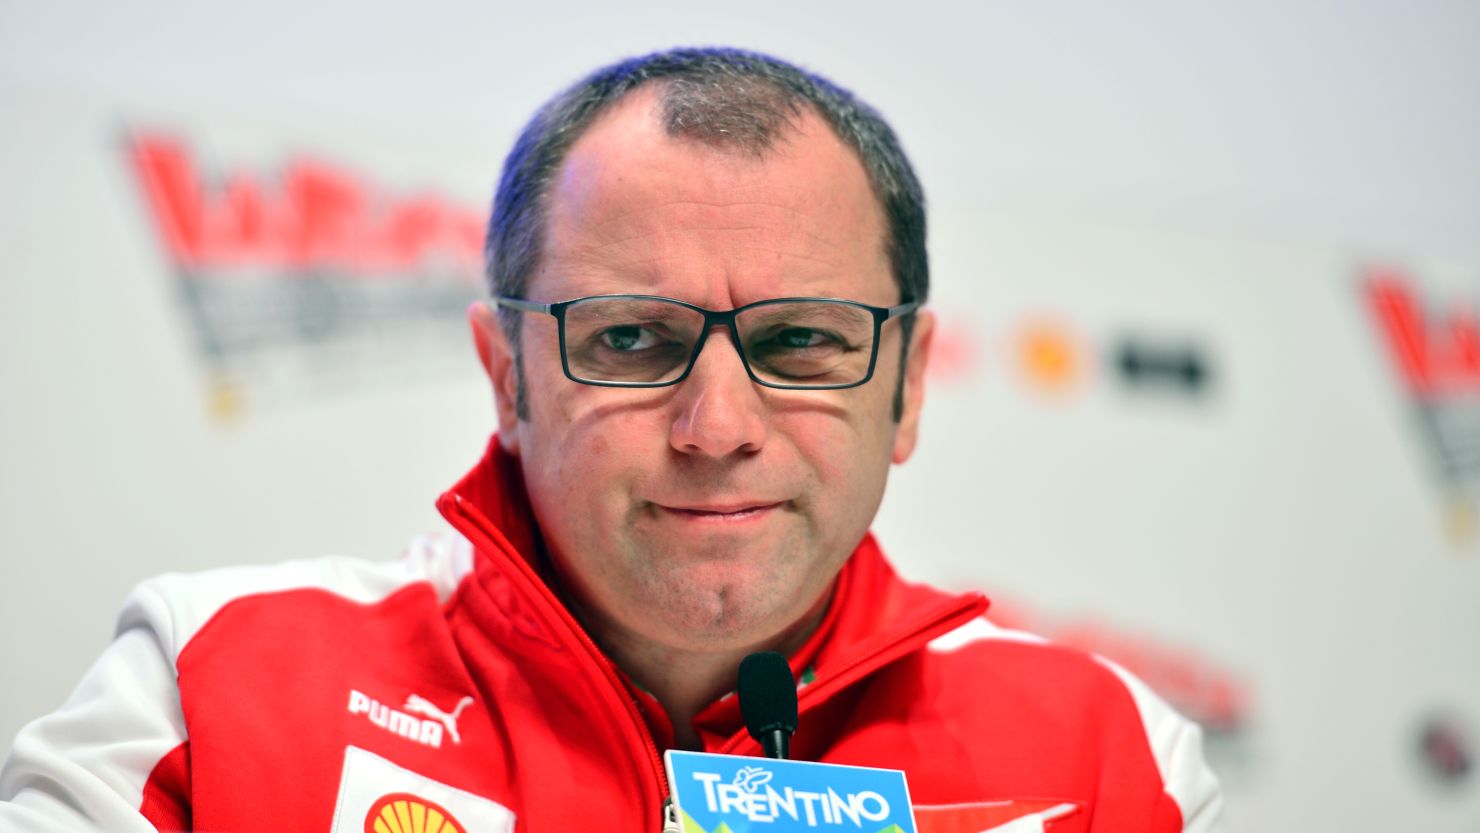 Stefano Domenicali wants Ferrari to challenge for a first drivers' title since 2007.